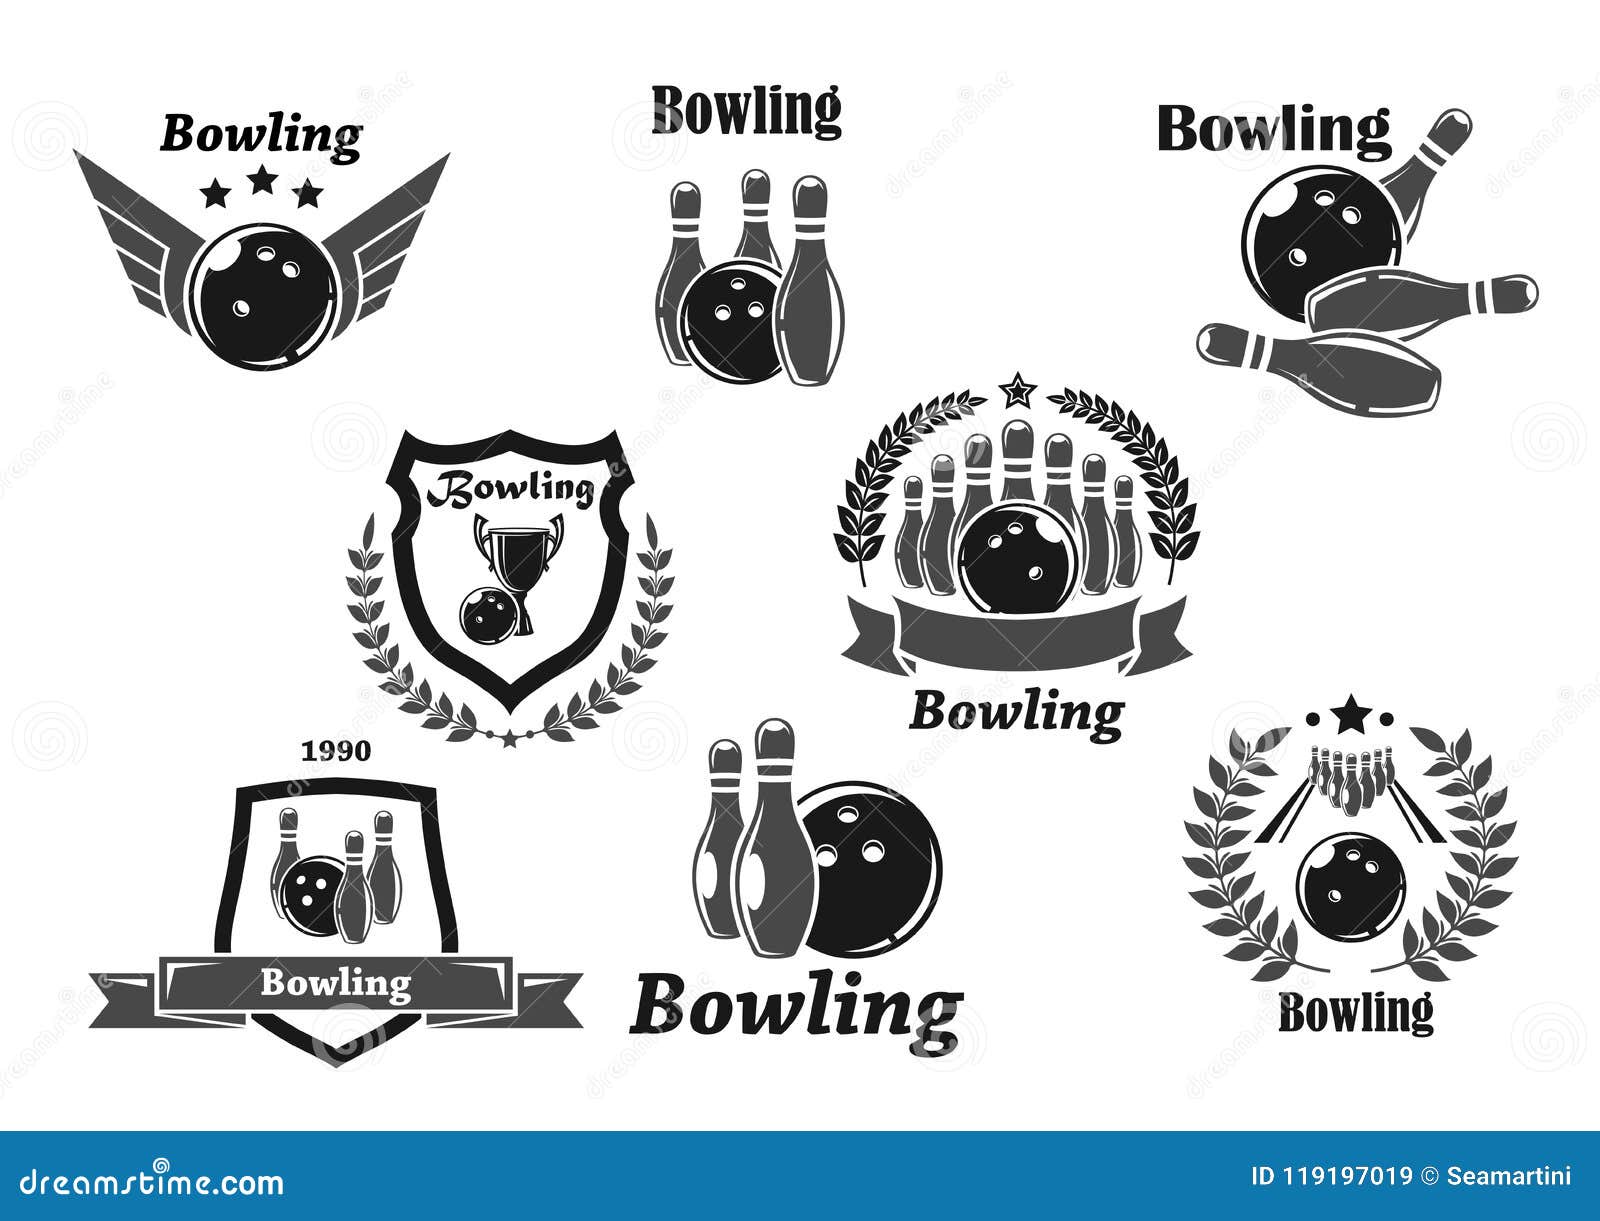 Bowling Championship or Contest Award Vector Icons Stock Vector ...